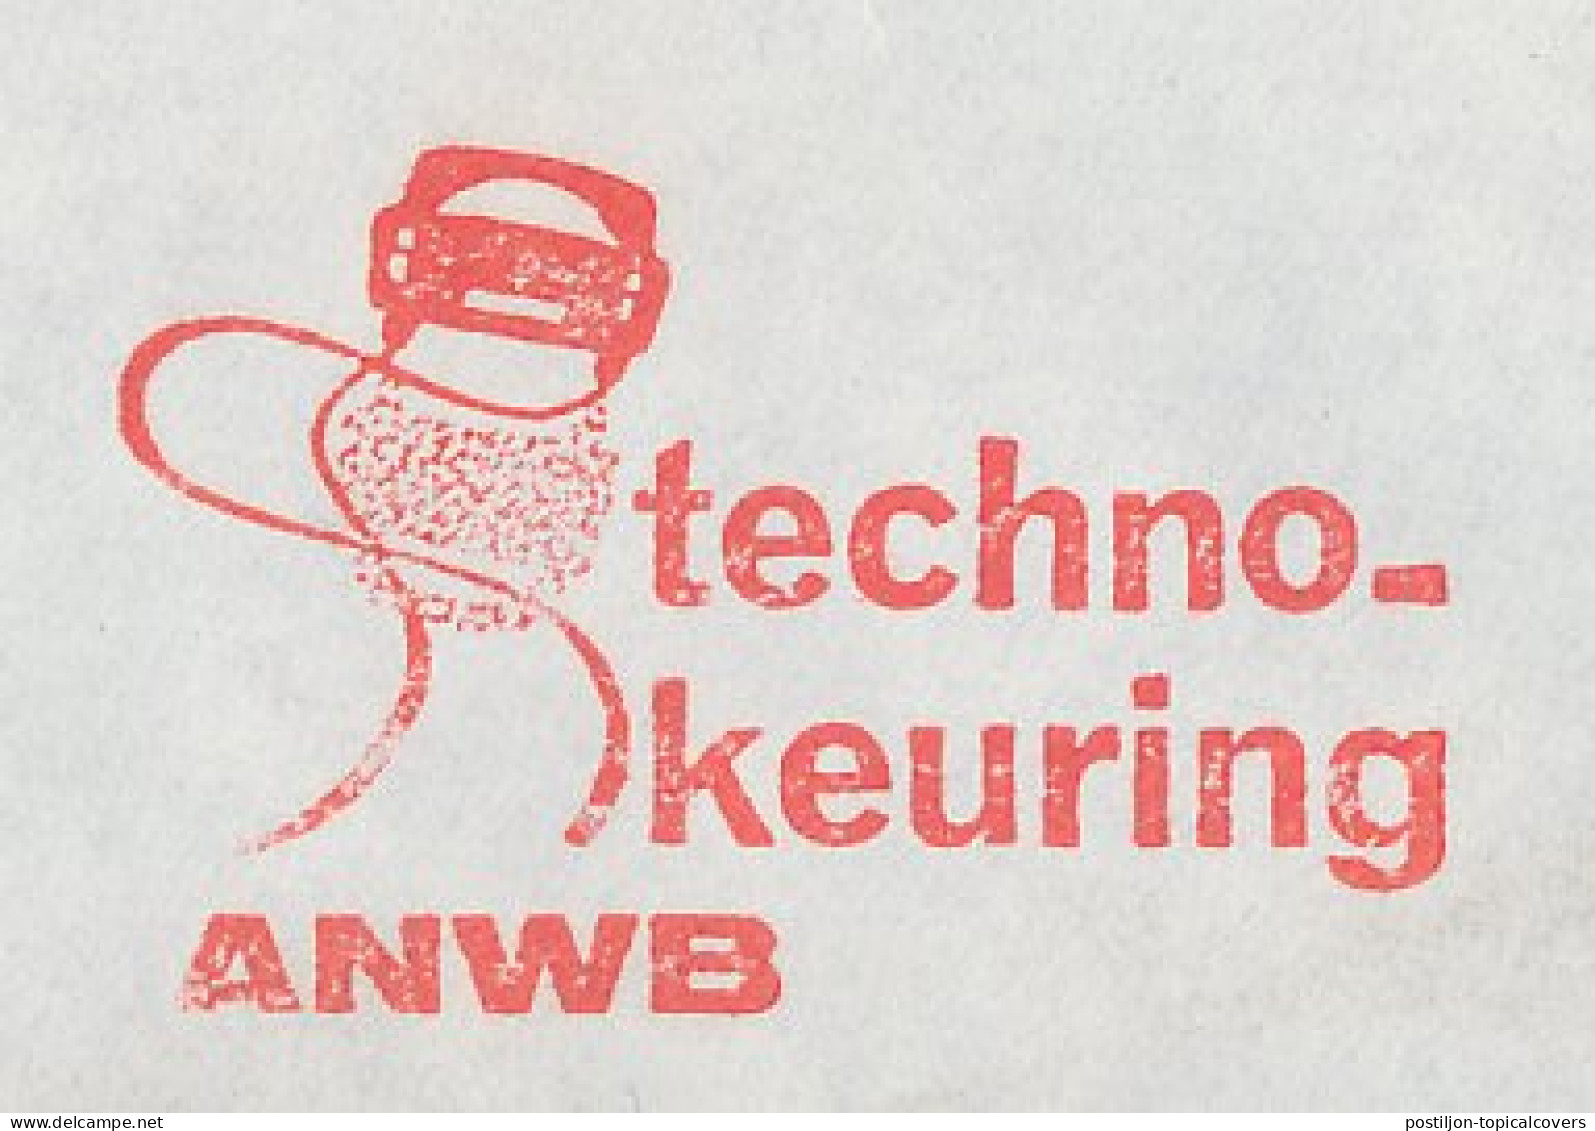 Meter Cover Netherlands 1967 Technical Inspection ANWB - General Dutch Cycling Association - Auto's